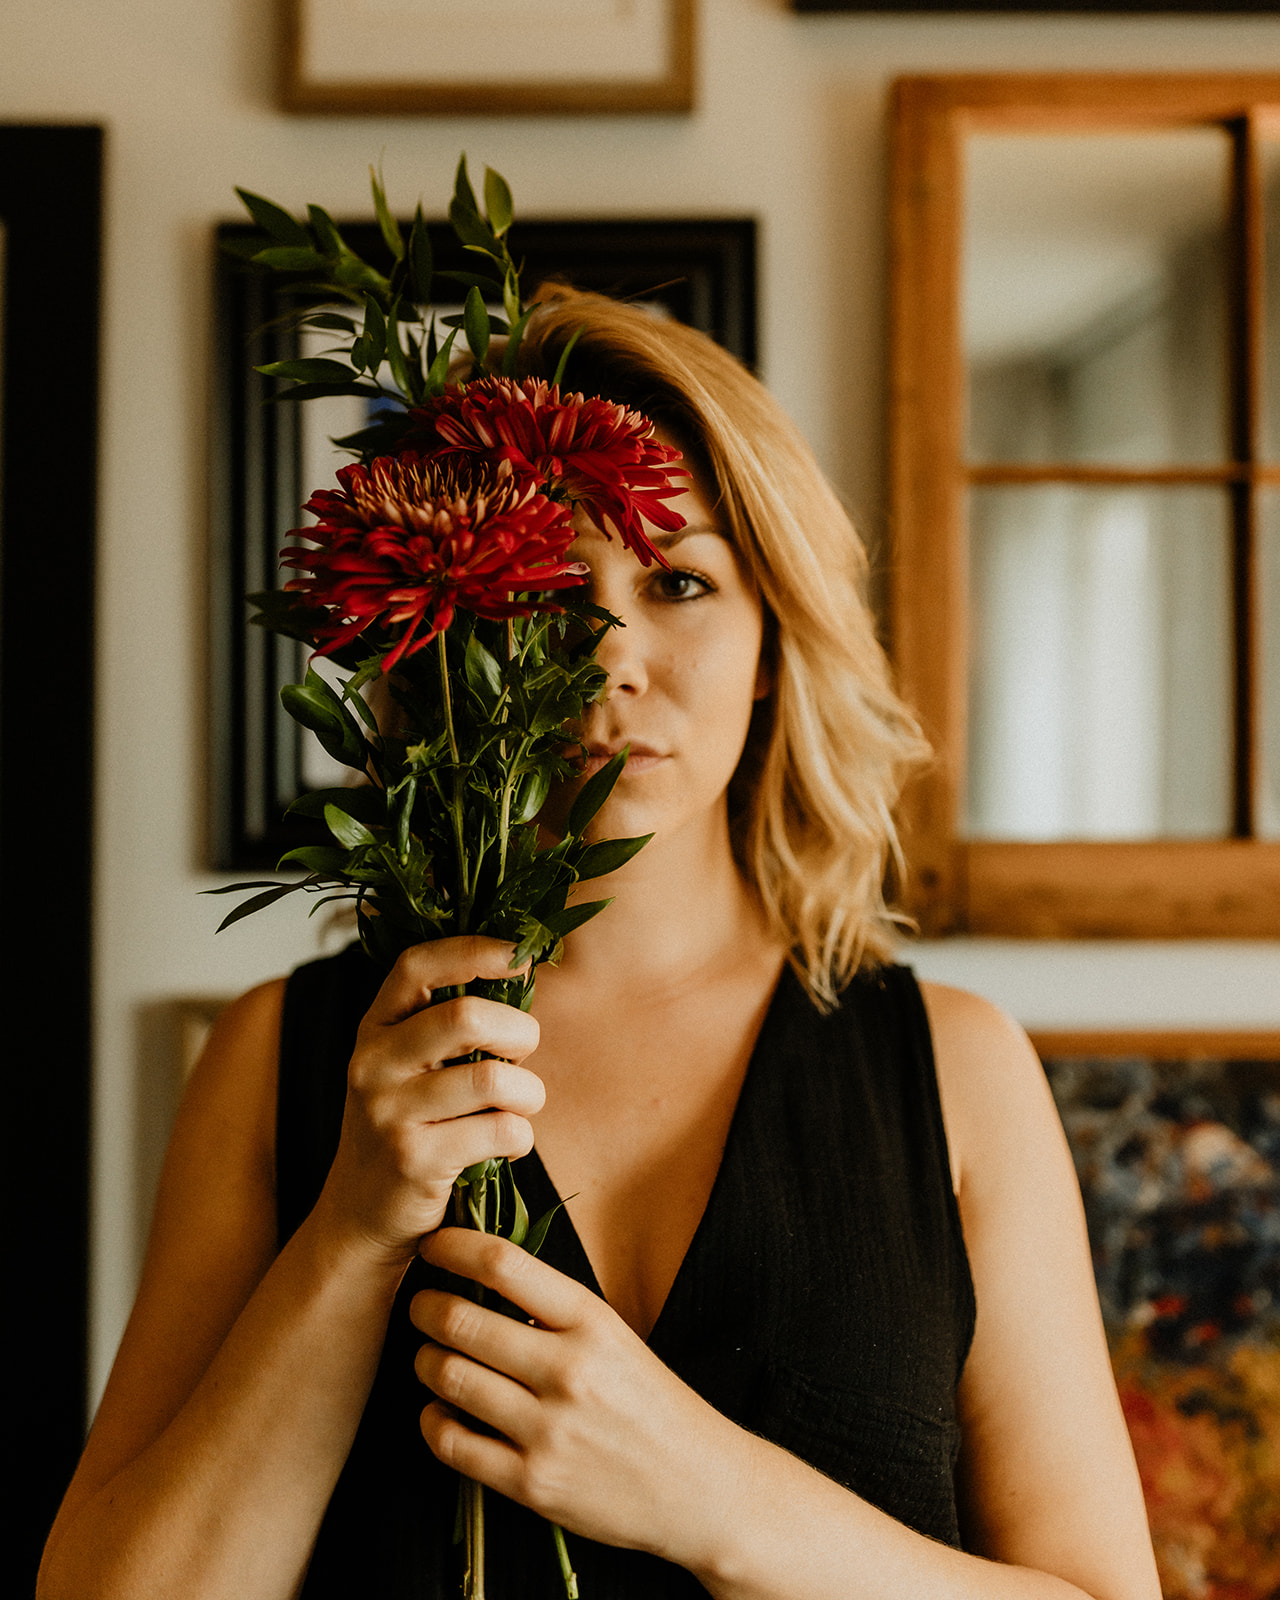 Lauren Hughes holding red flowers in front of her face.